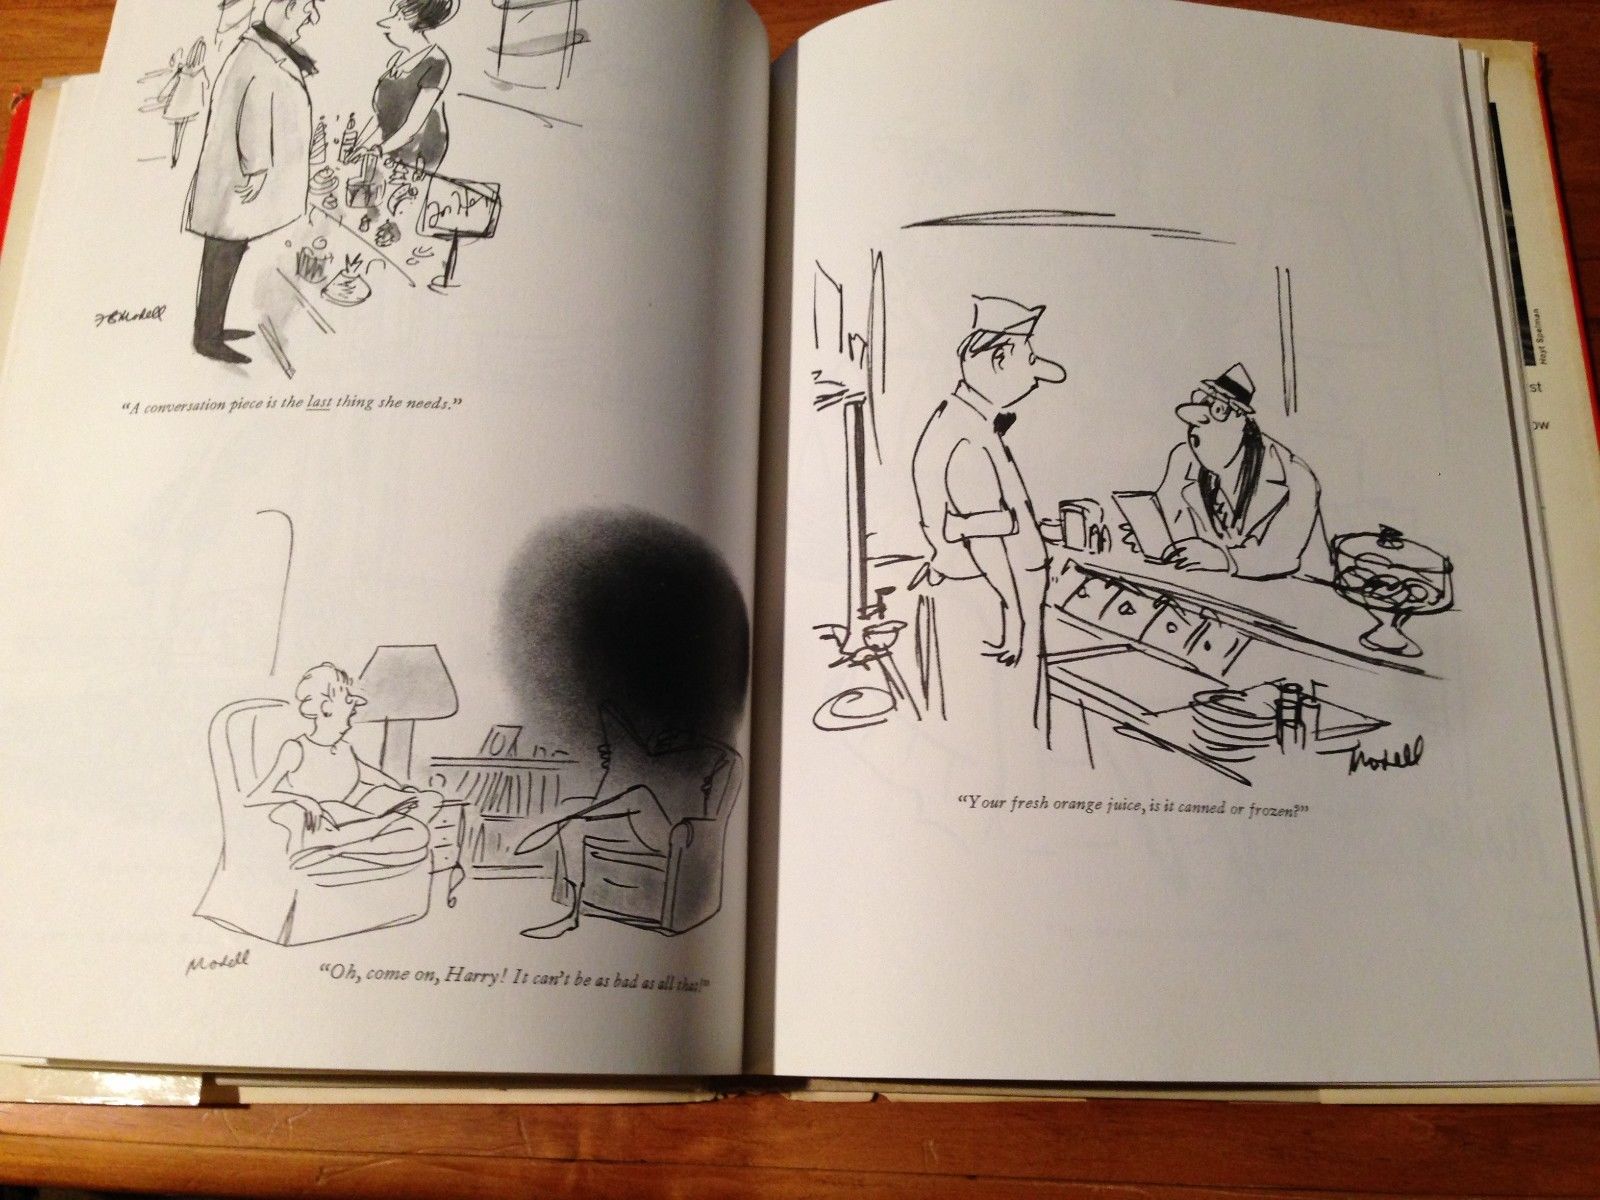 Attempted Bloggery: More Cheer from Frank Modell